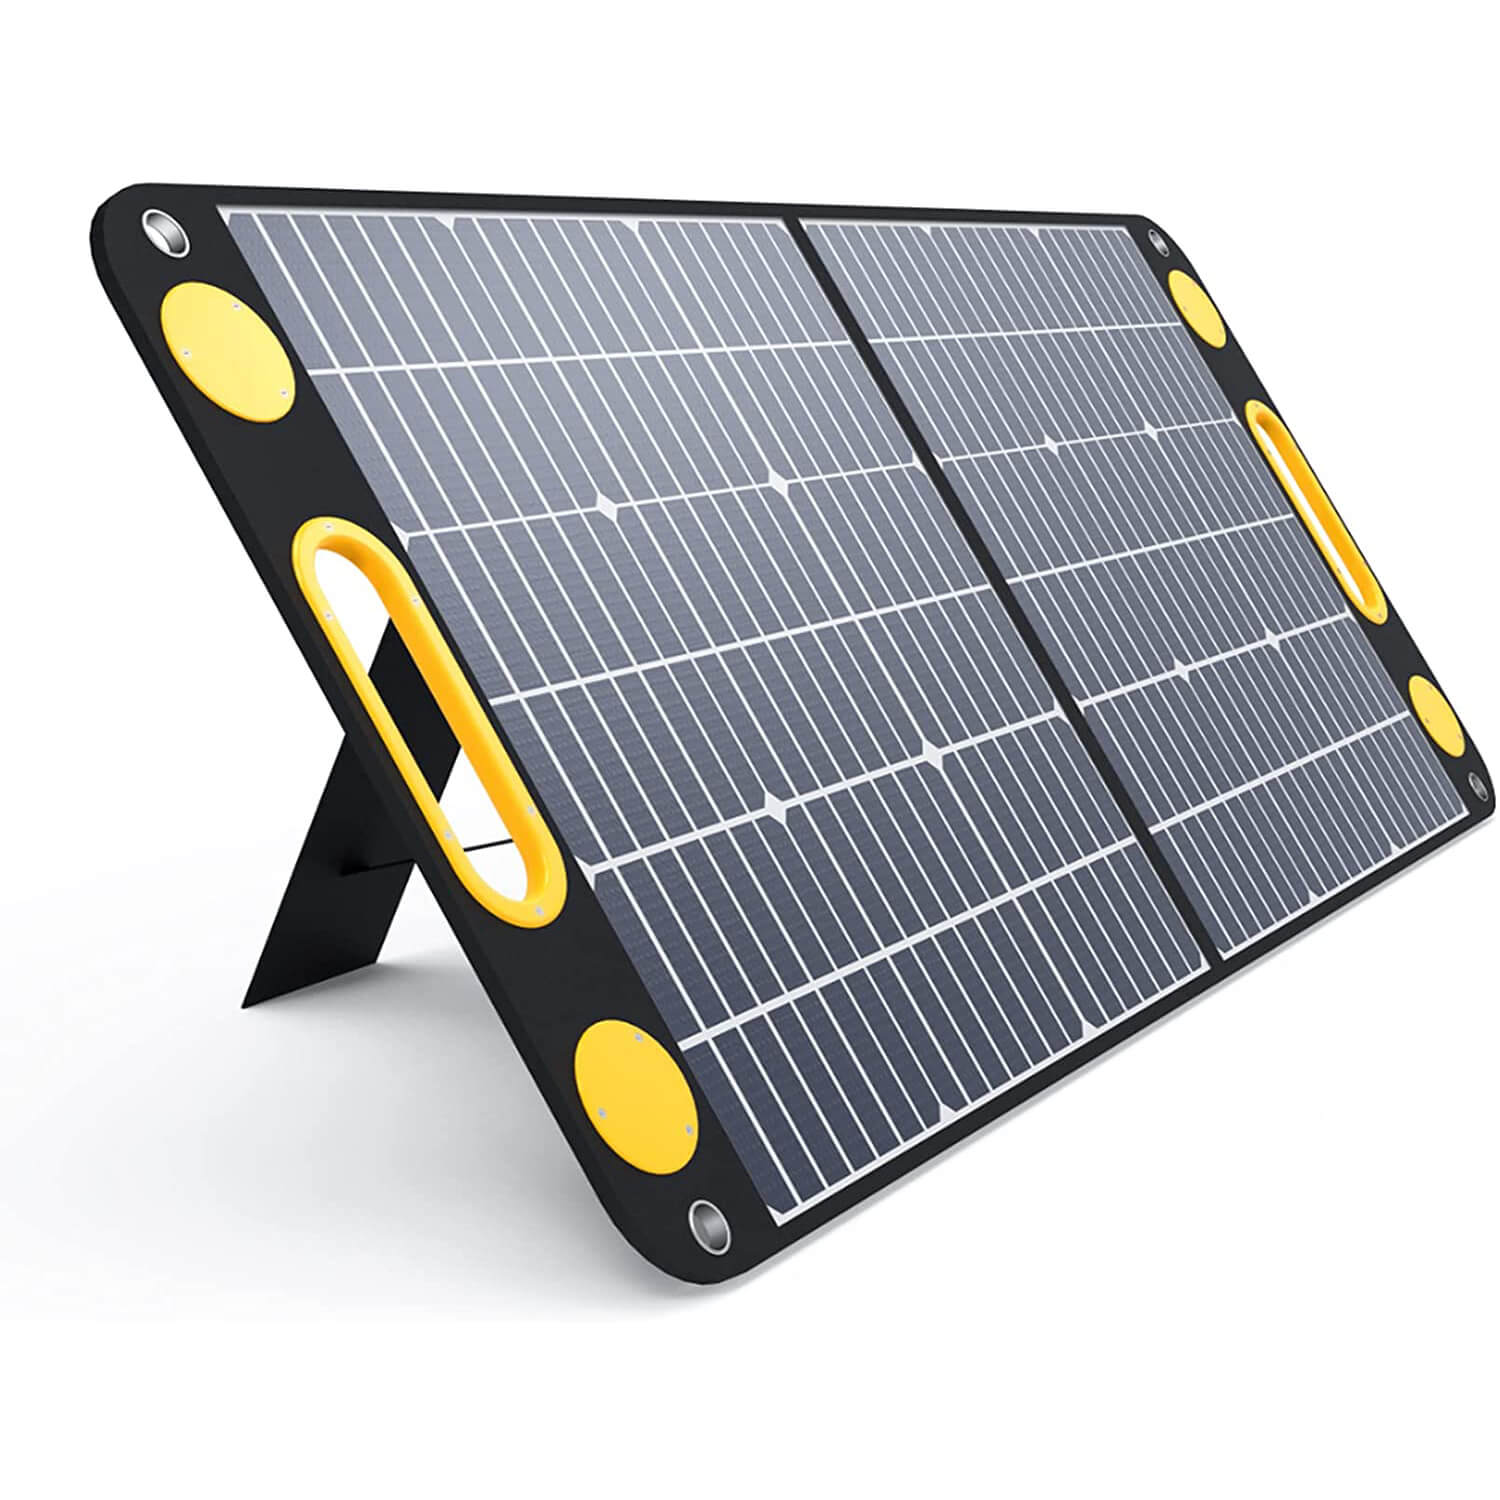 Togo Power Solar Panel Laptop Charger